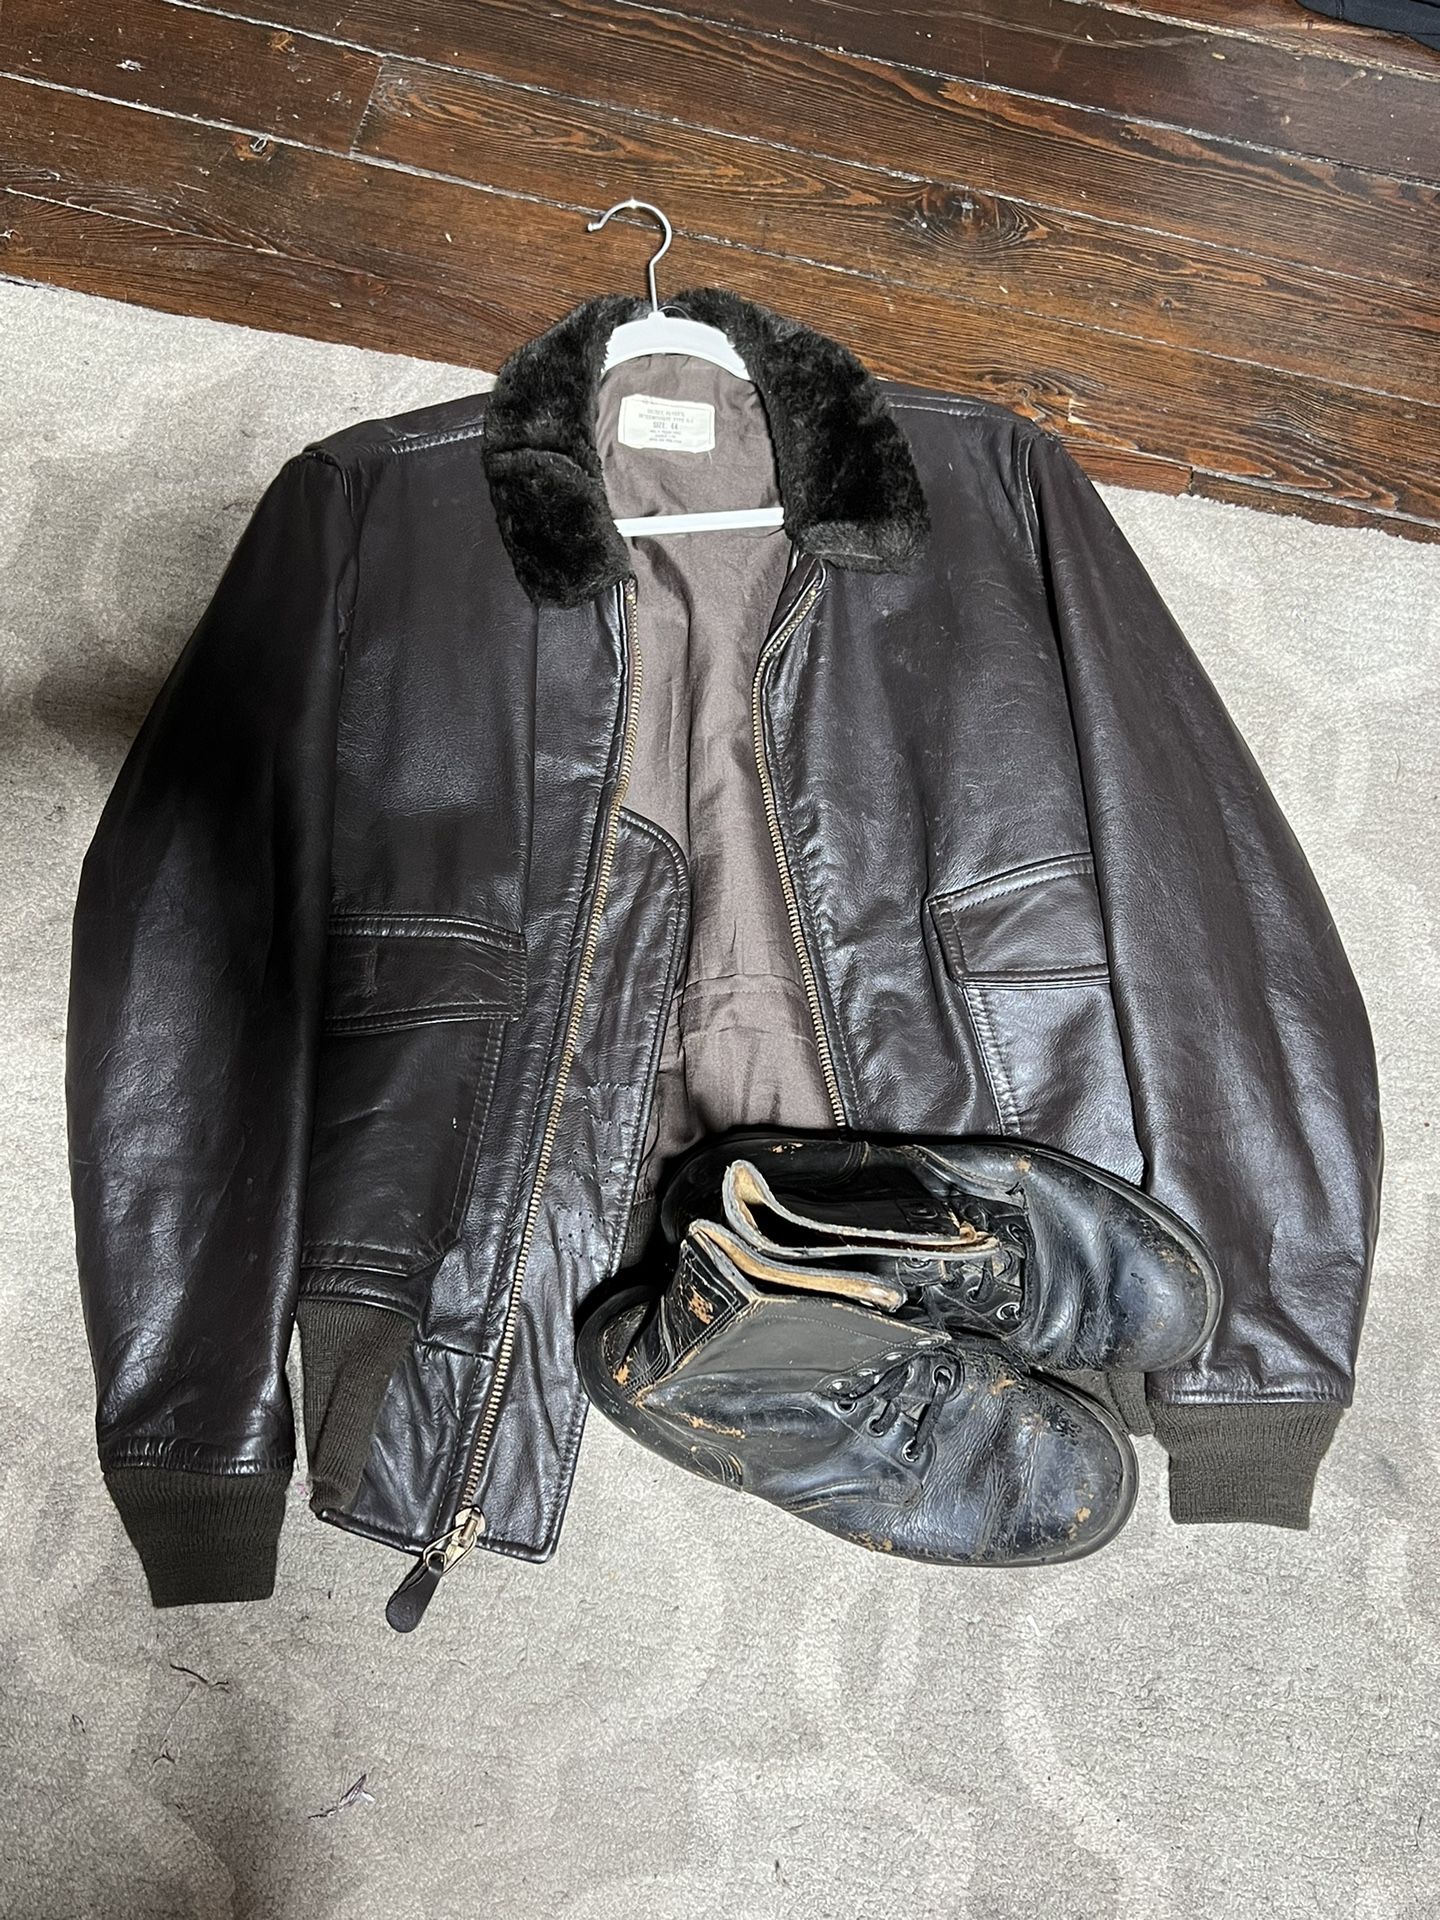 United States Naval Flight Jacket, And Boots Vietnam